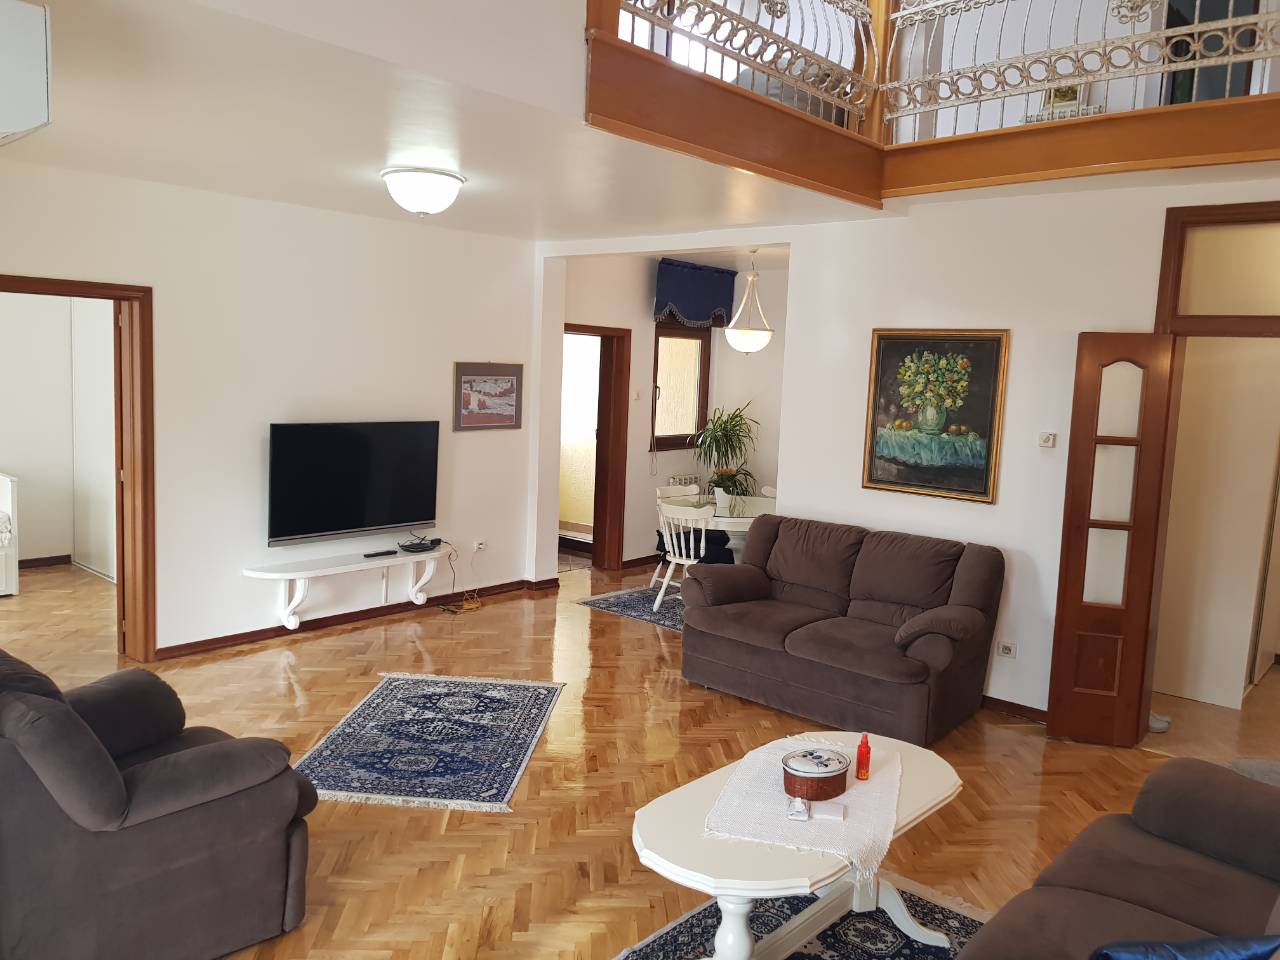 Flat for rent 142m2 - duplex - furnished - near the river ...